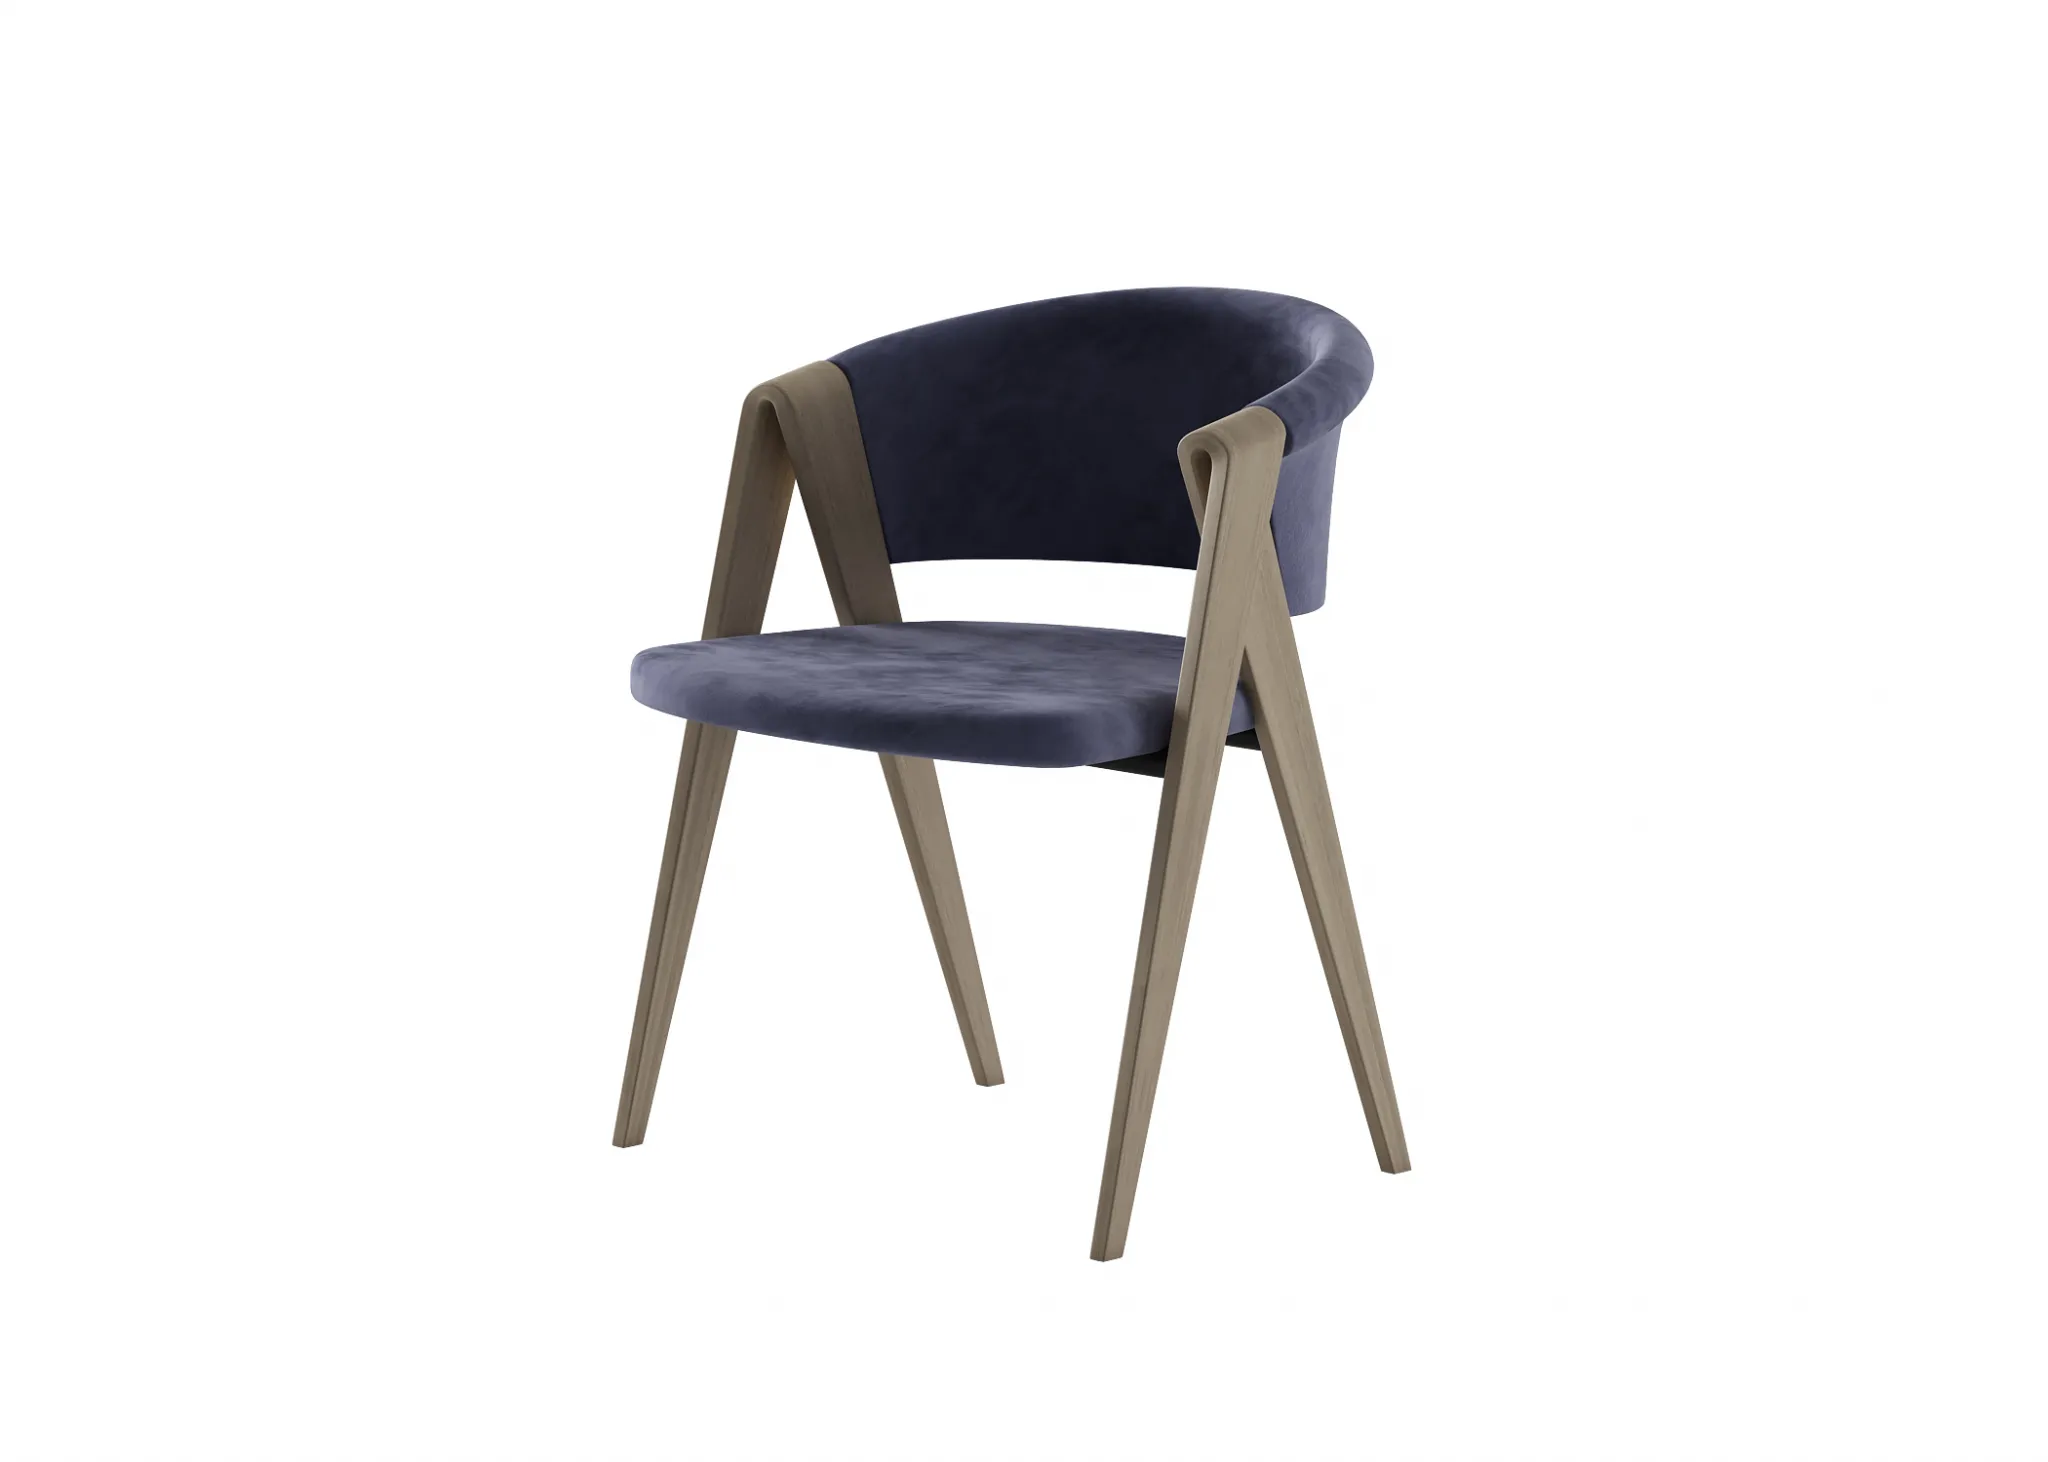 FURNITURE 3D MODELS – CHAIRS – 0325